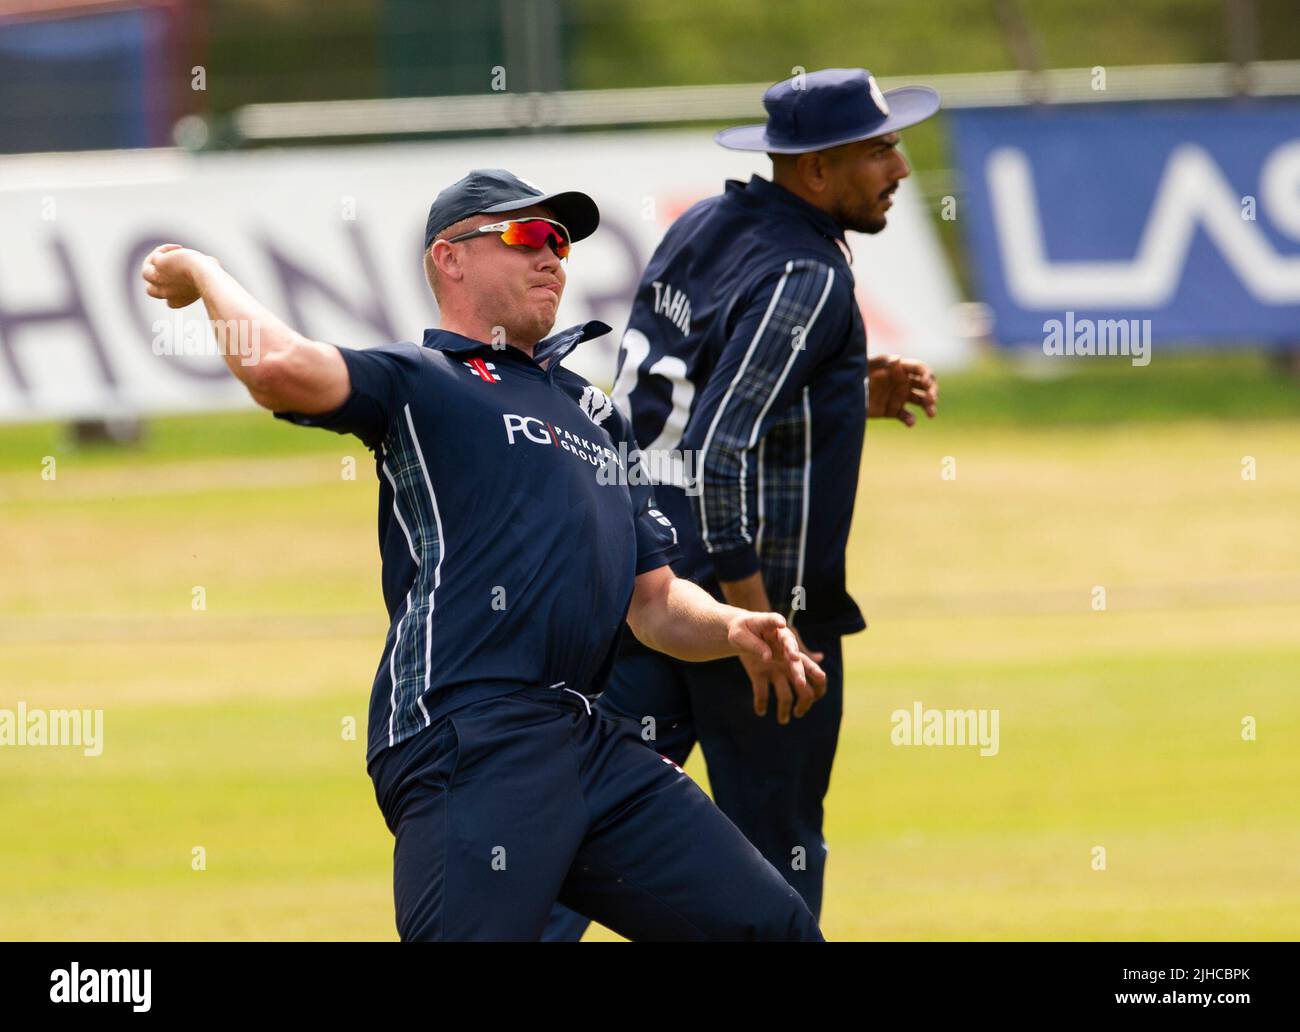 ICC Men's Cricket World Cup League 2 - Scotland v, Nepal. 17th July, 2022. Scotland take on Nepal for the second time in the ICC Div 2 Men's Cricket World Cup League 2 at Titwood, Glasgow. Pic shows: Great fielding by Scotland's Chris McBride. Credit: Ian Jacobs/Alamy Live News Stock Photo